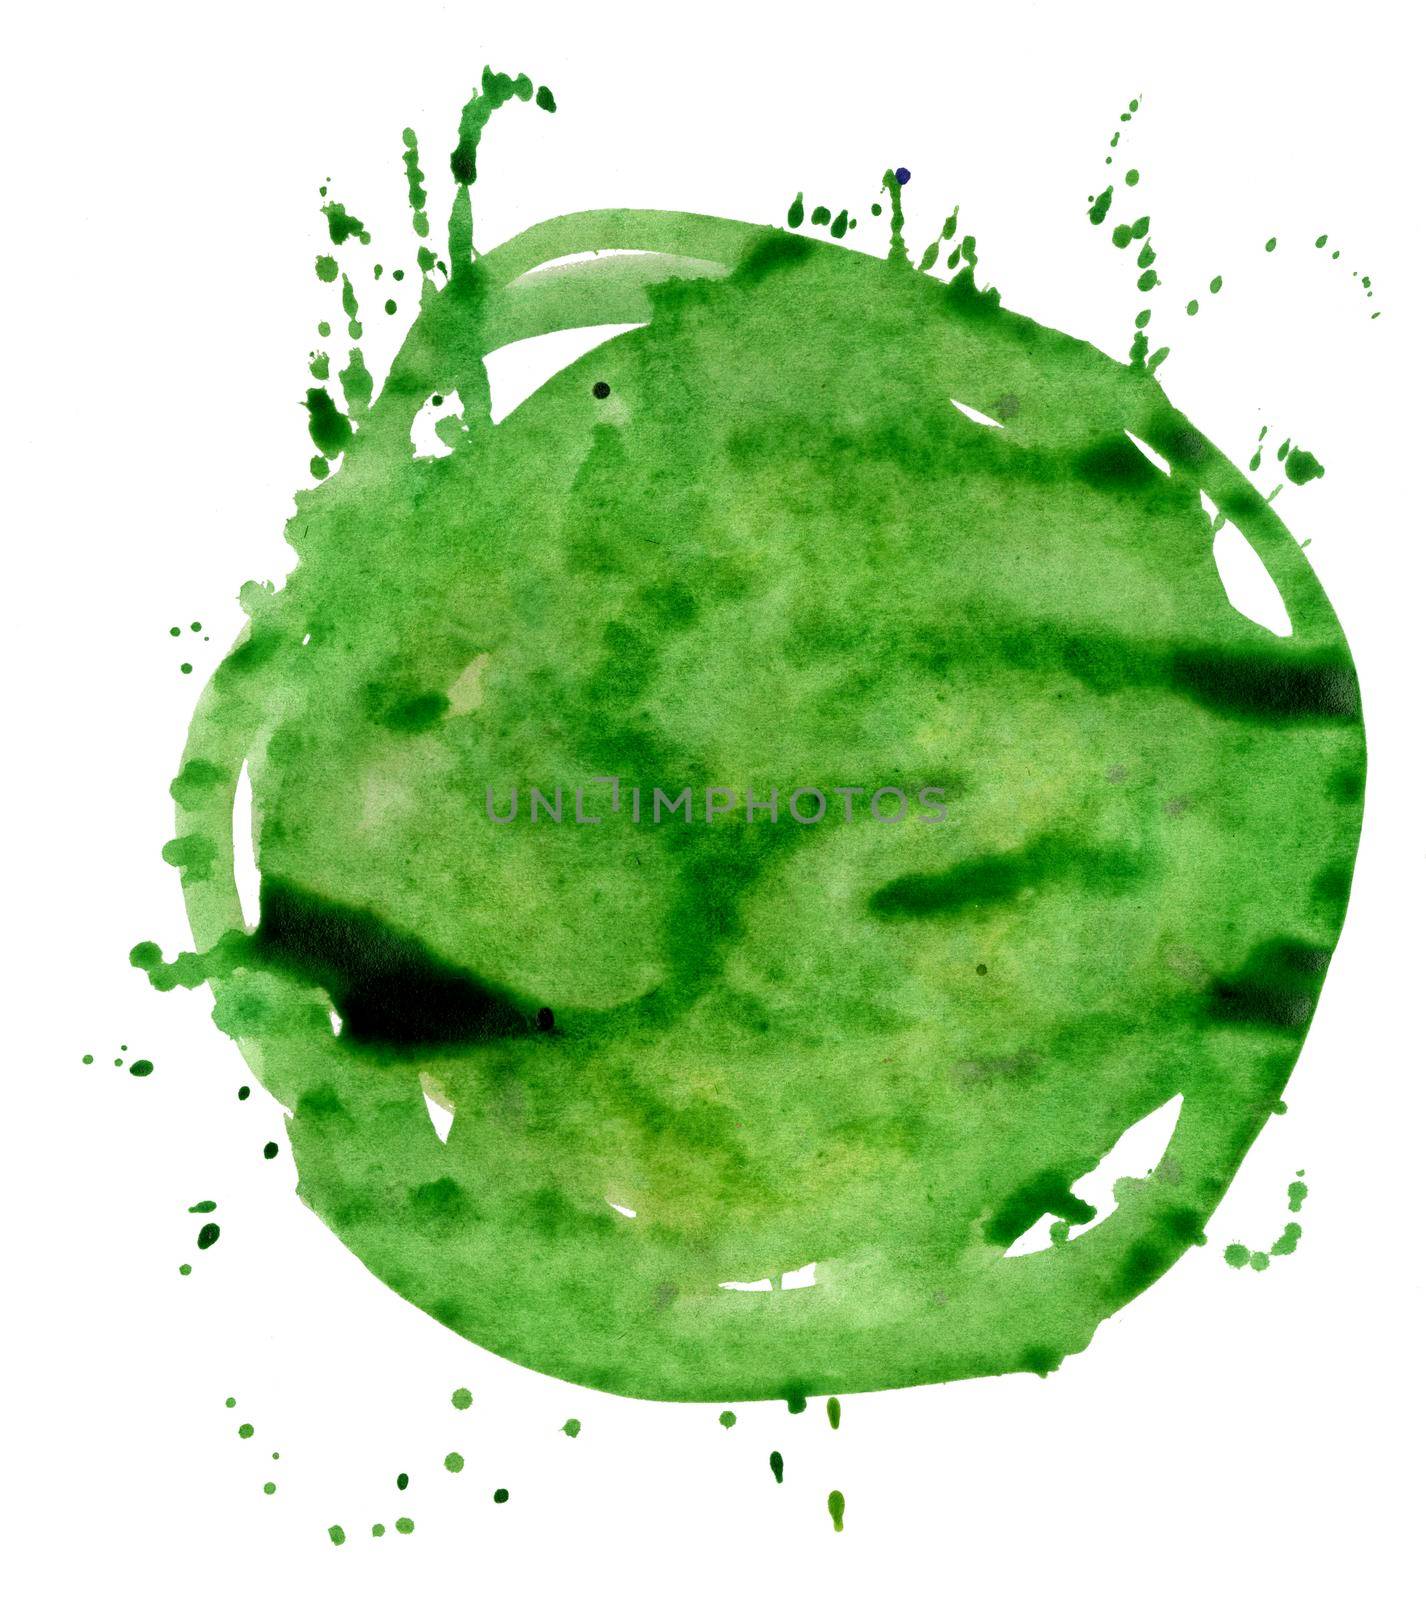 Green watercolor circle isolated on white background